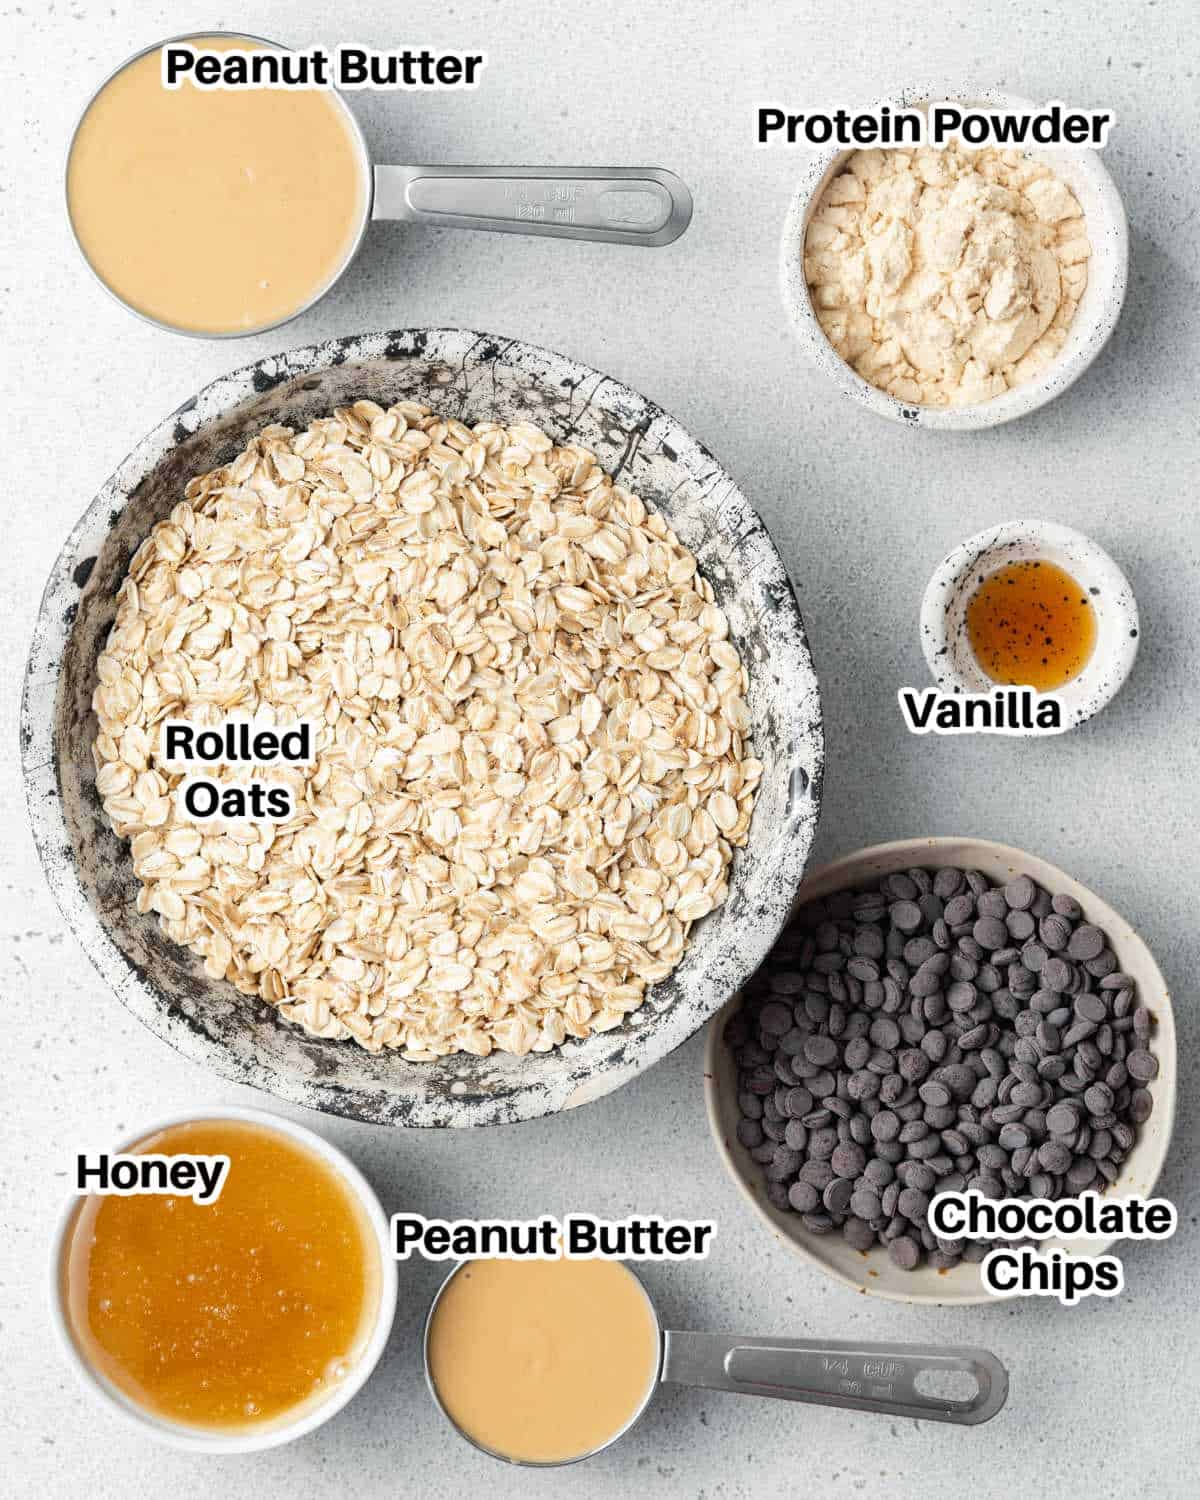 ingredients laid out to make an oatmeal bar.